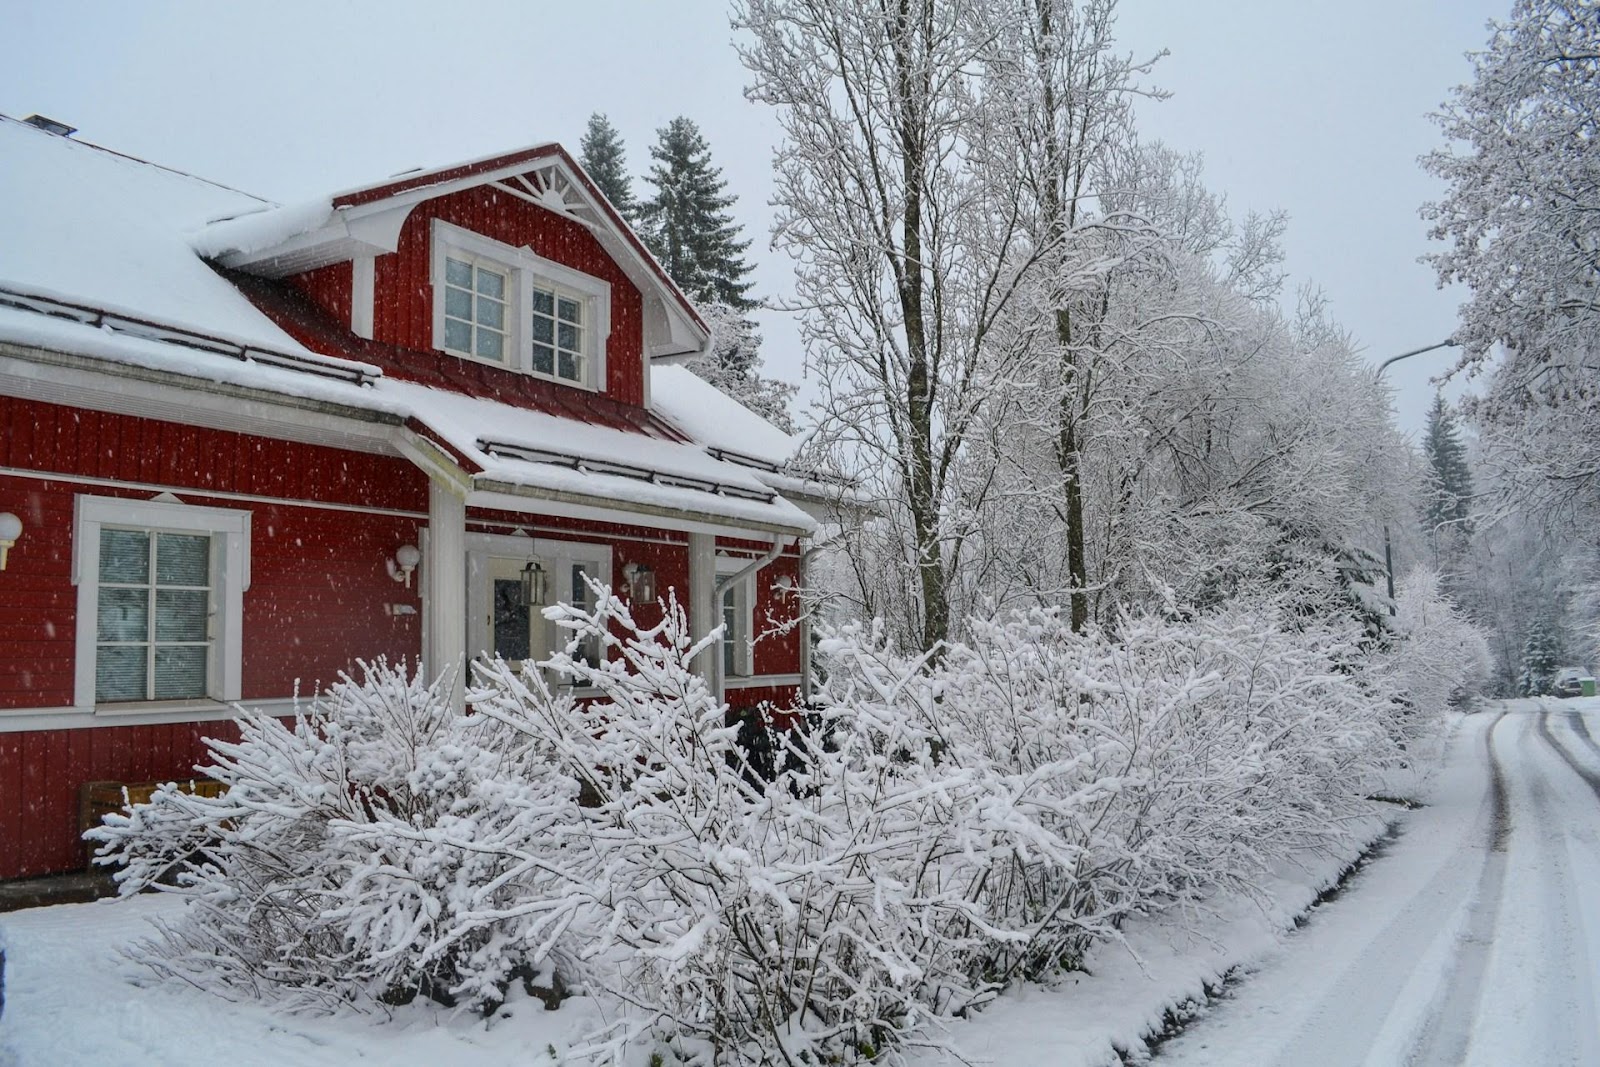 Home safety: a house in very snowy weather